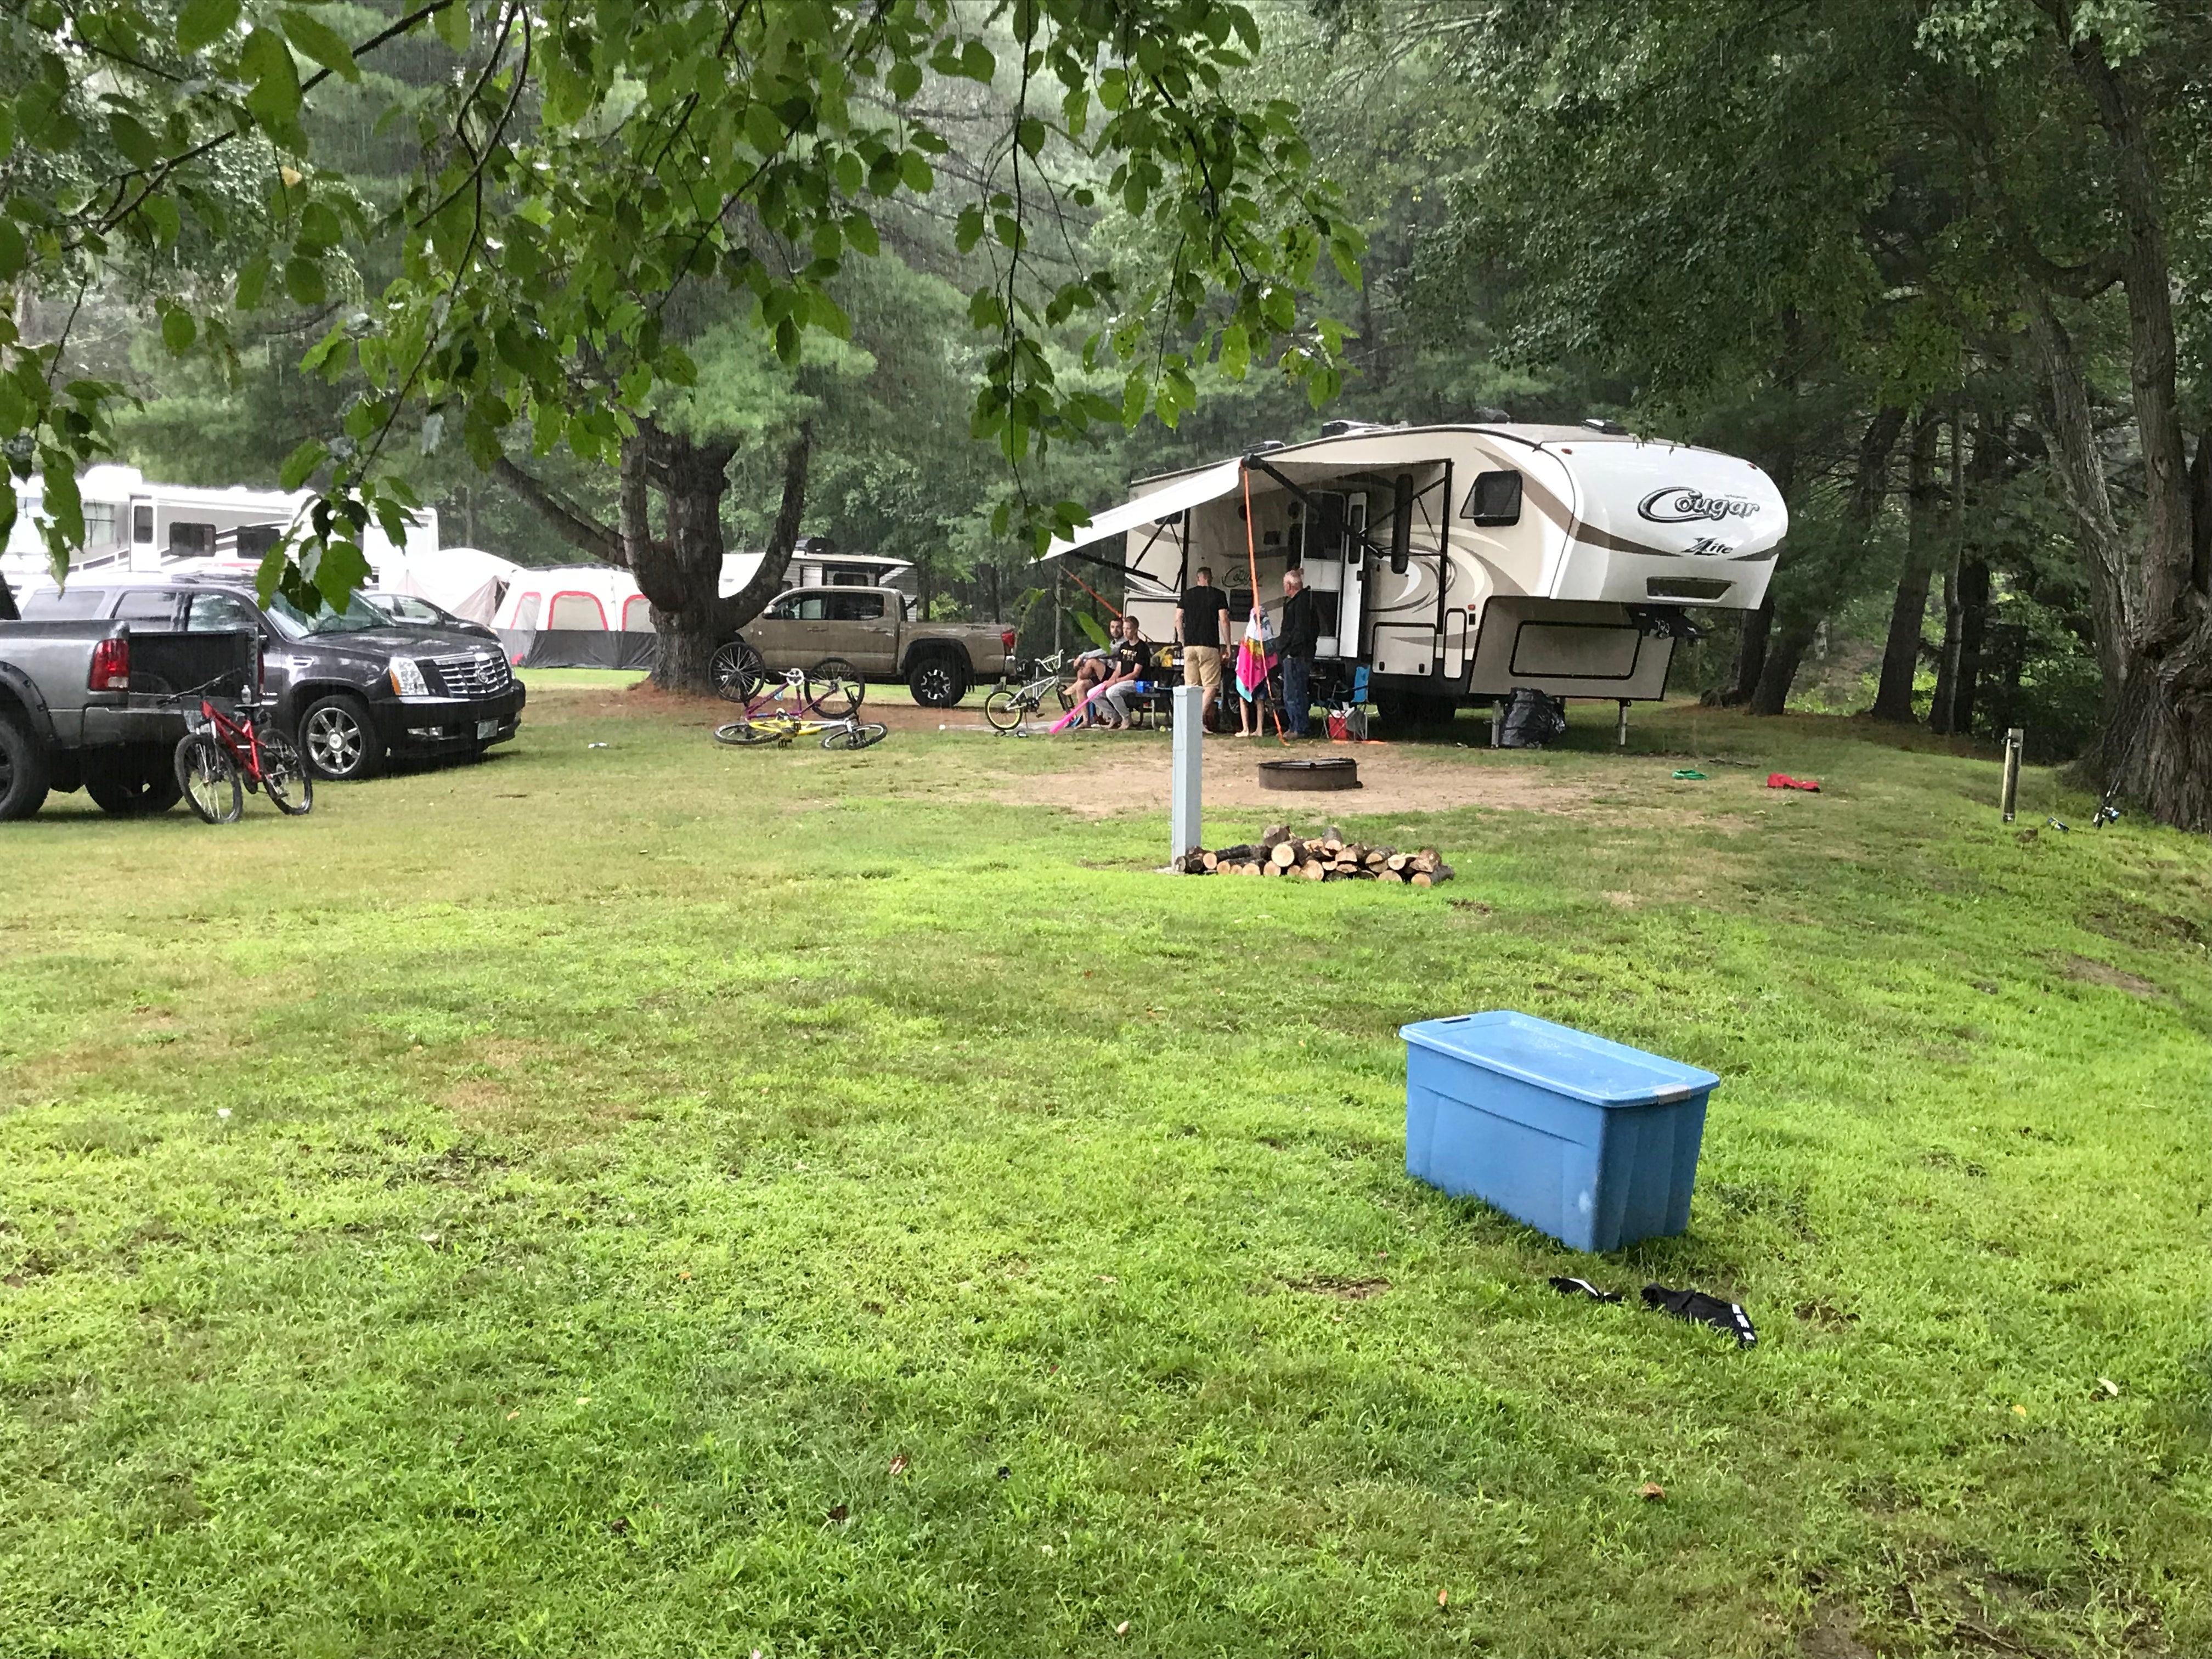 Camper submitted image from Ashuelot River Campground - 5